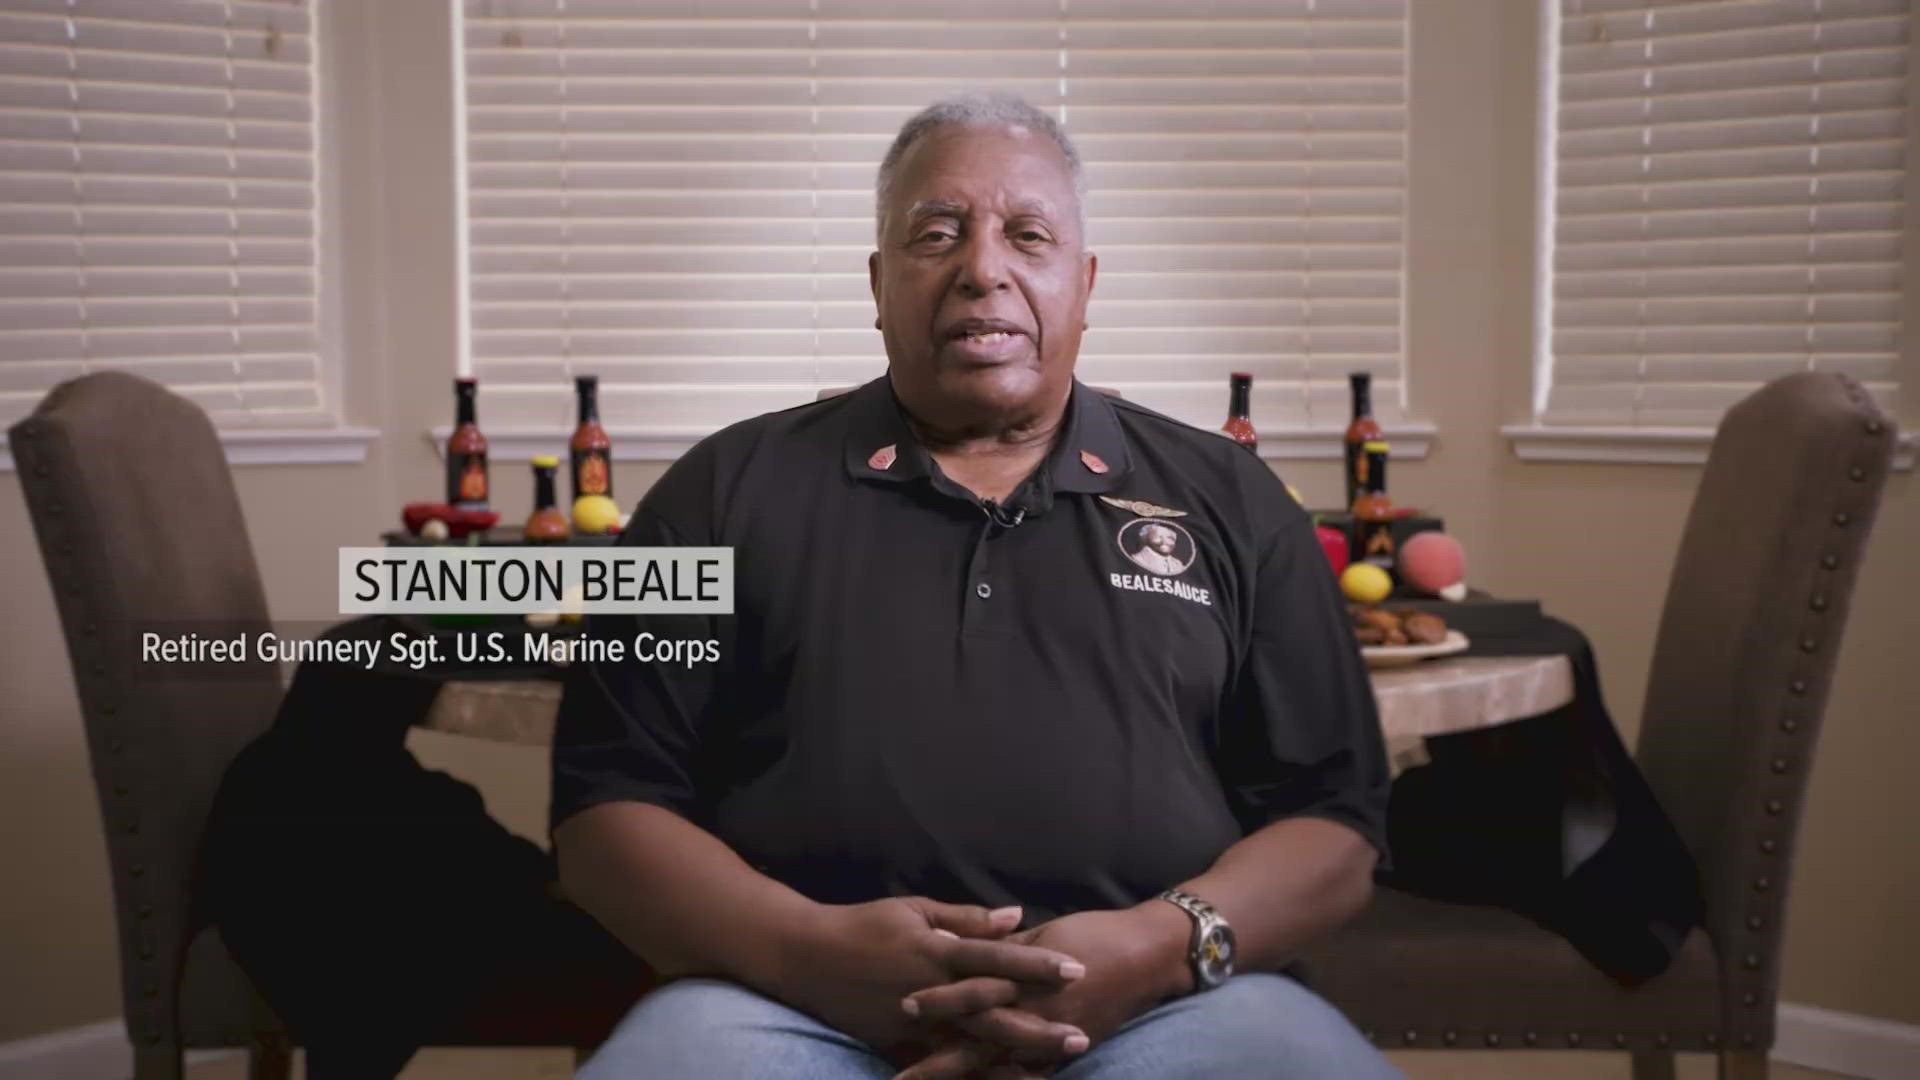 Stanton Beale is from West Philadelphia, Pennsylvania and is a retired Gunnery Sergeant Of The United States Marine Corps.